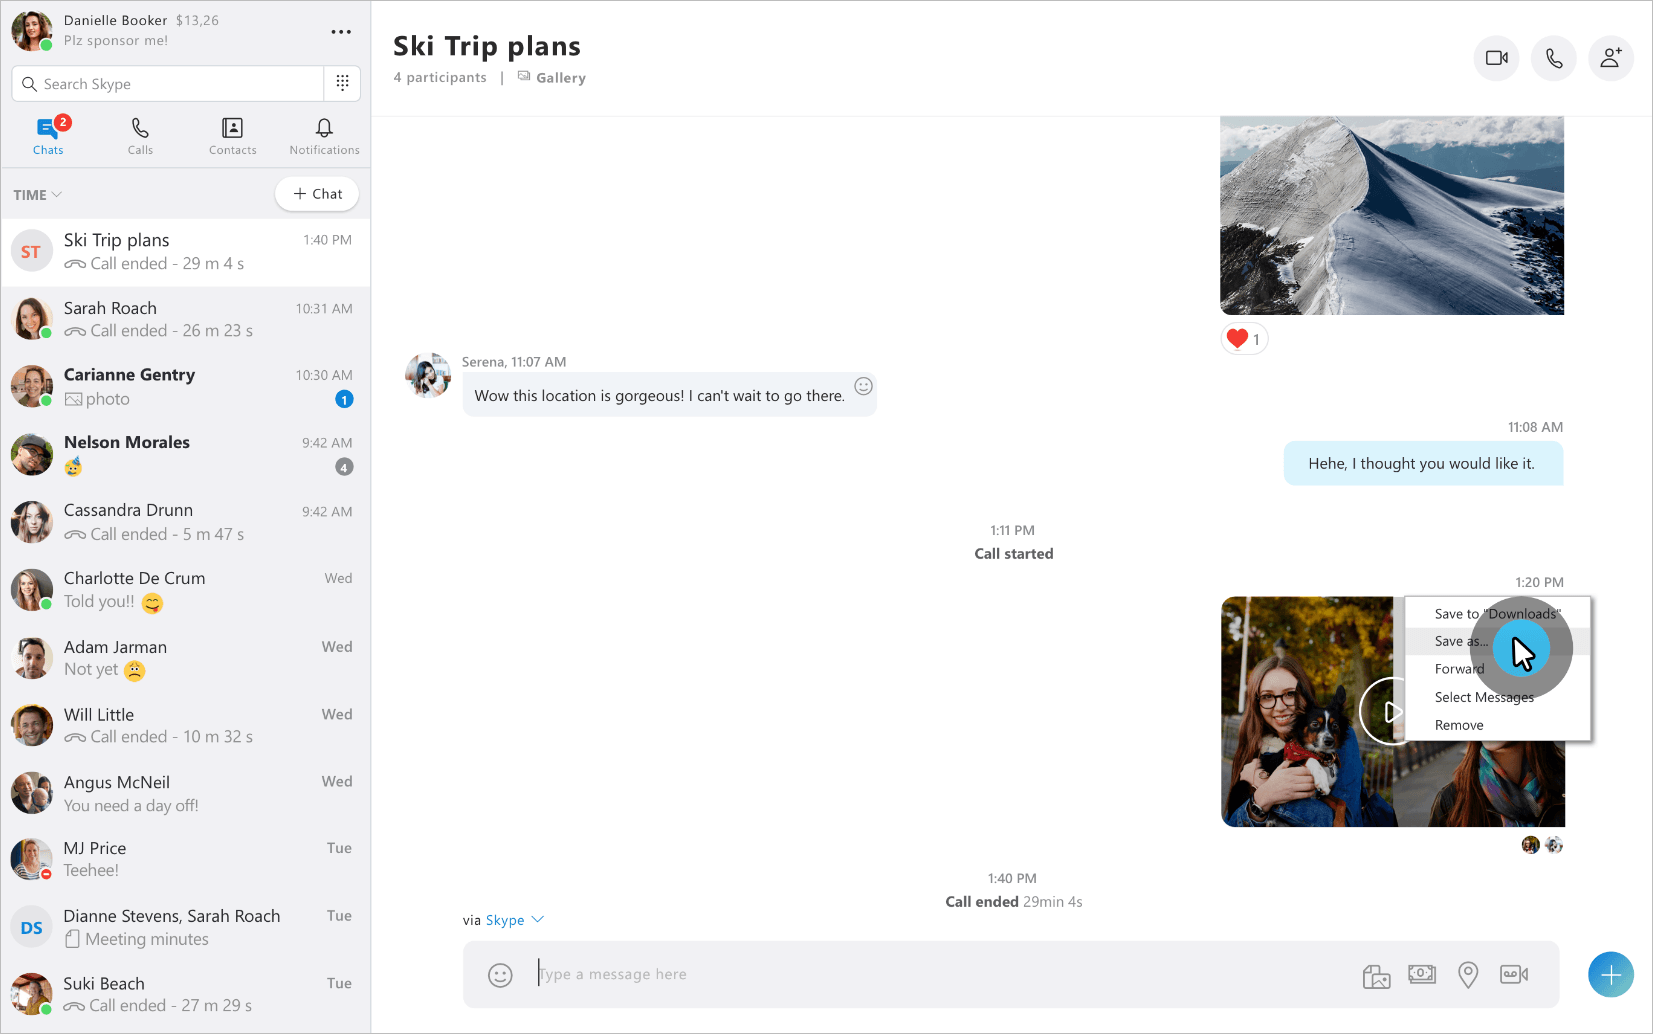 where do pictures download to from skype on a mac